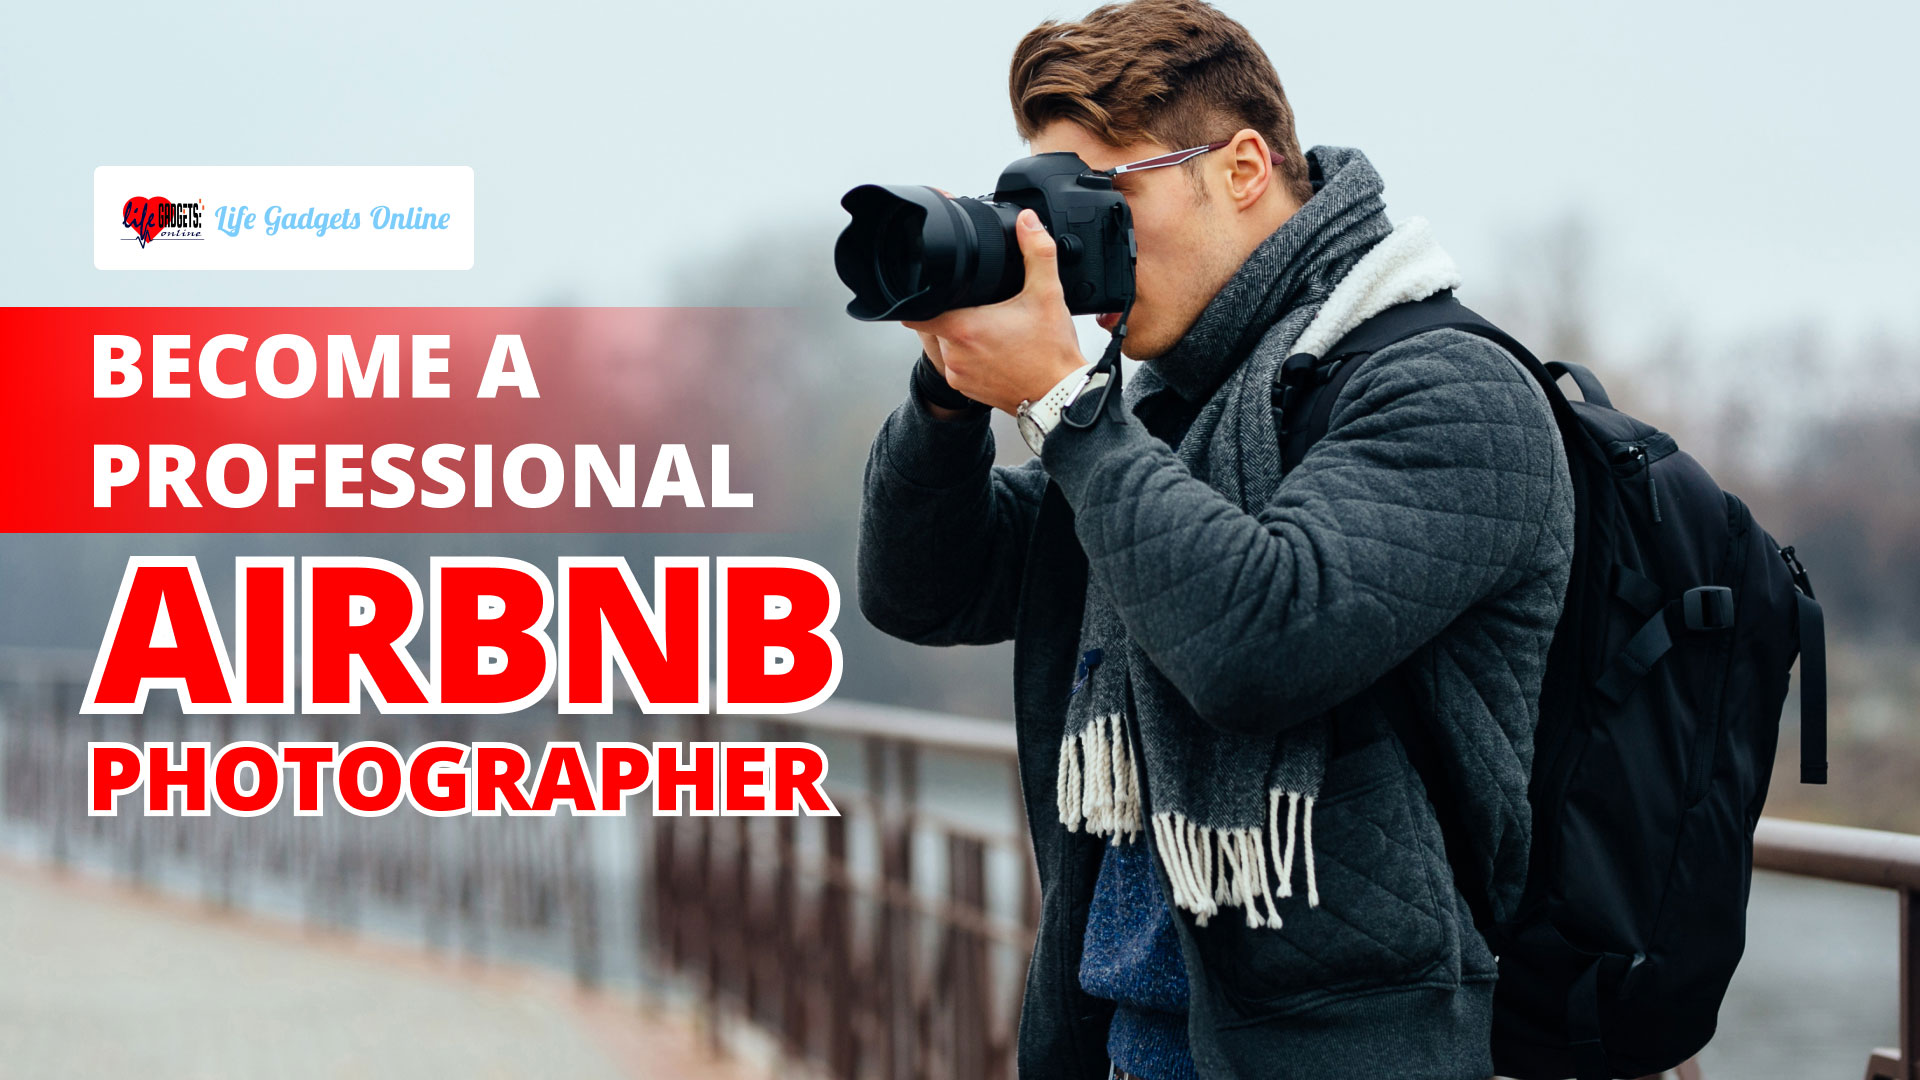 Become a professional Airbnb photographer